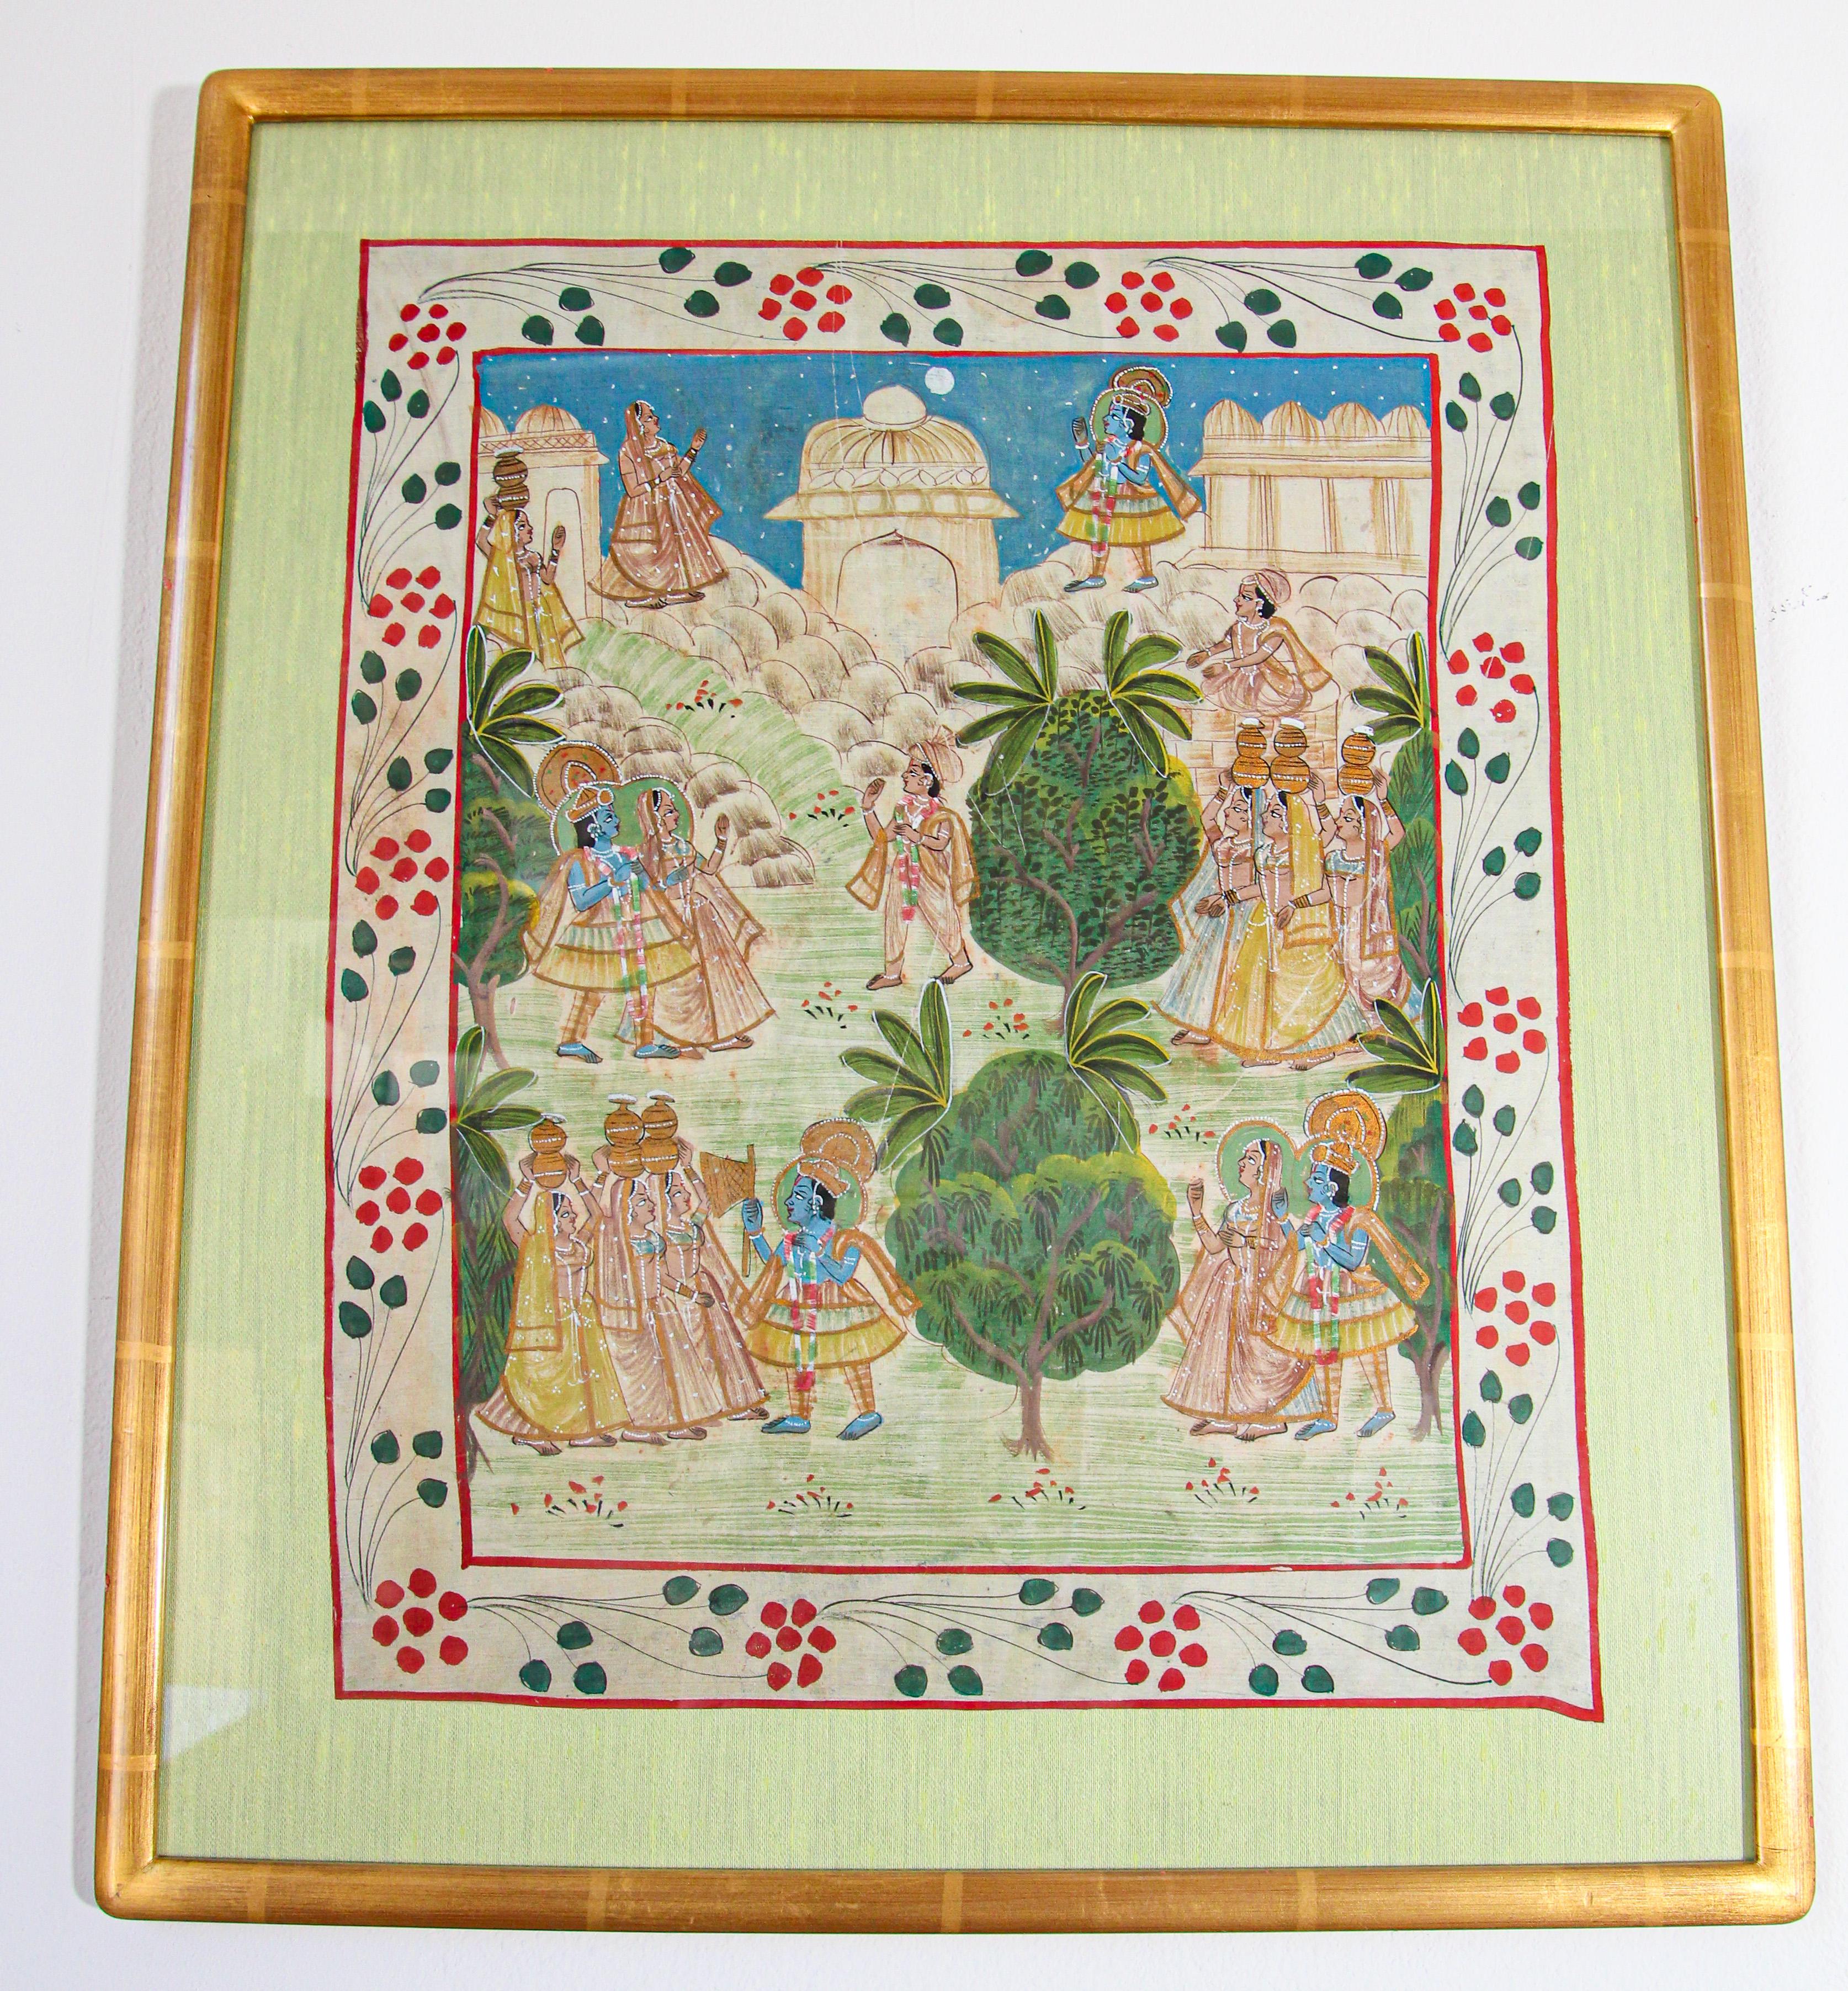 Krishna, Radha, and the Gopis Meet a Young Prince, Picchawai Painting 5